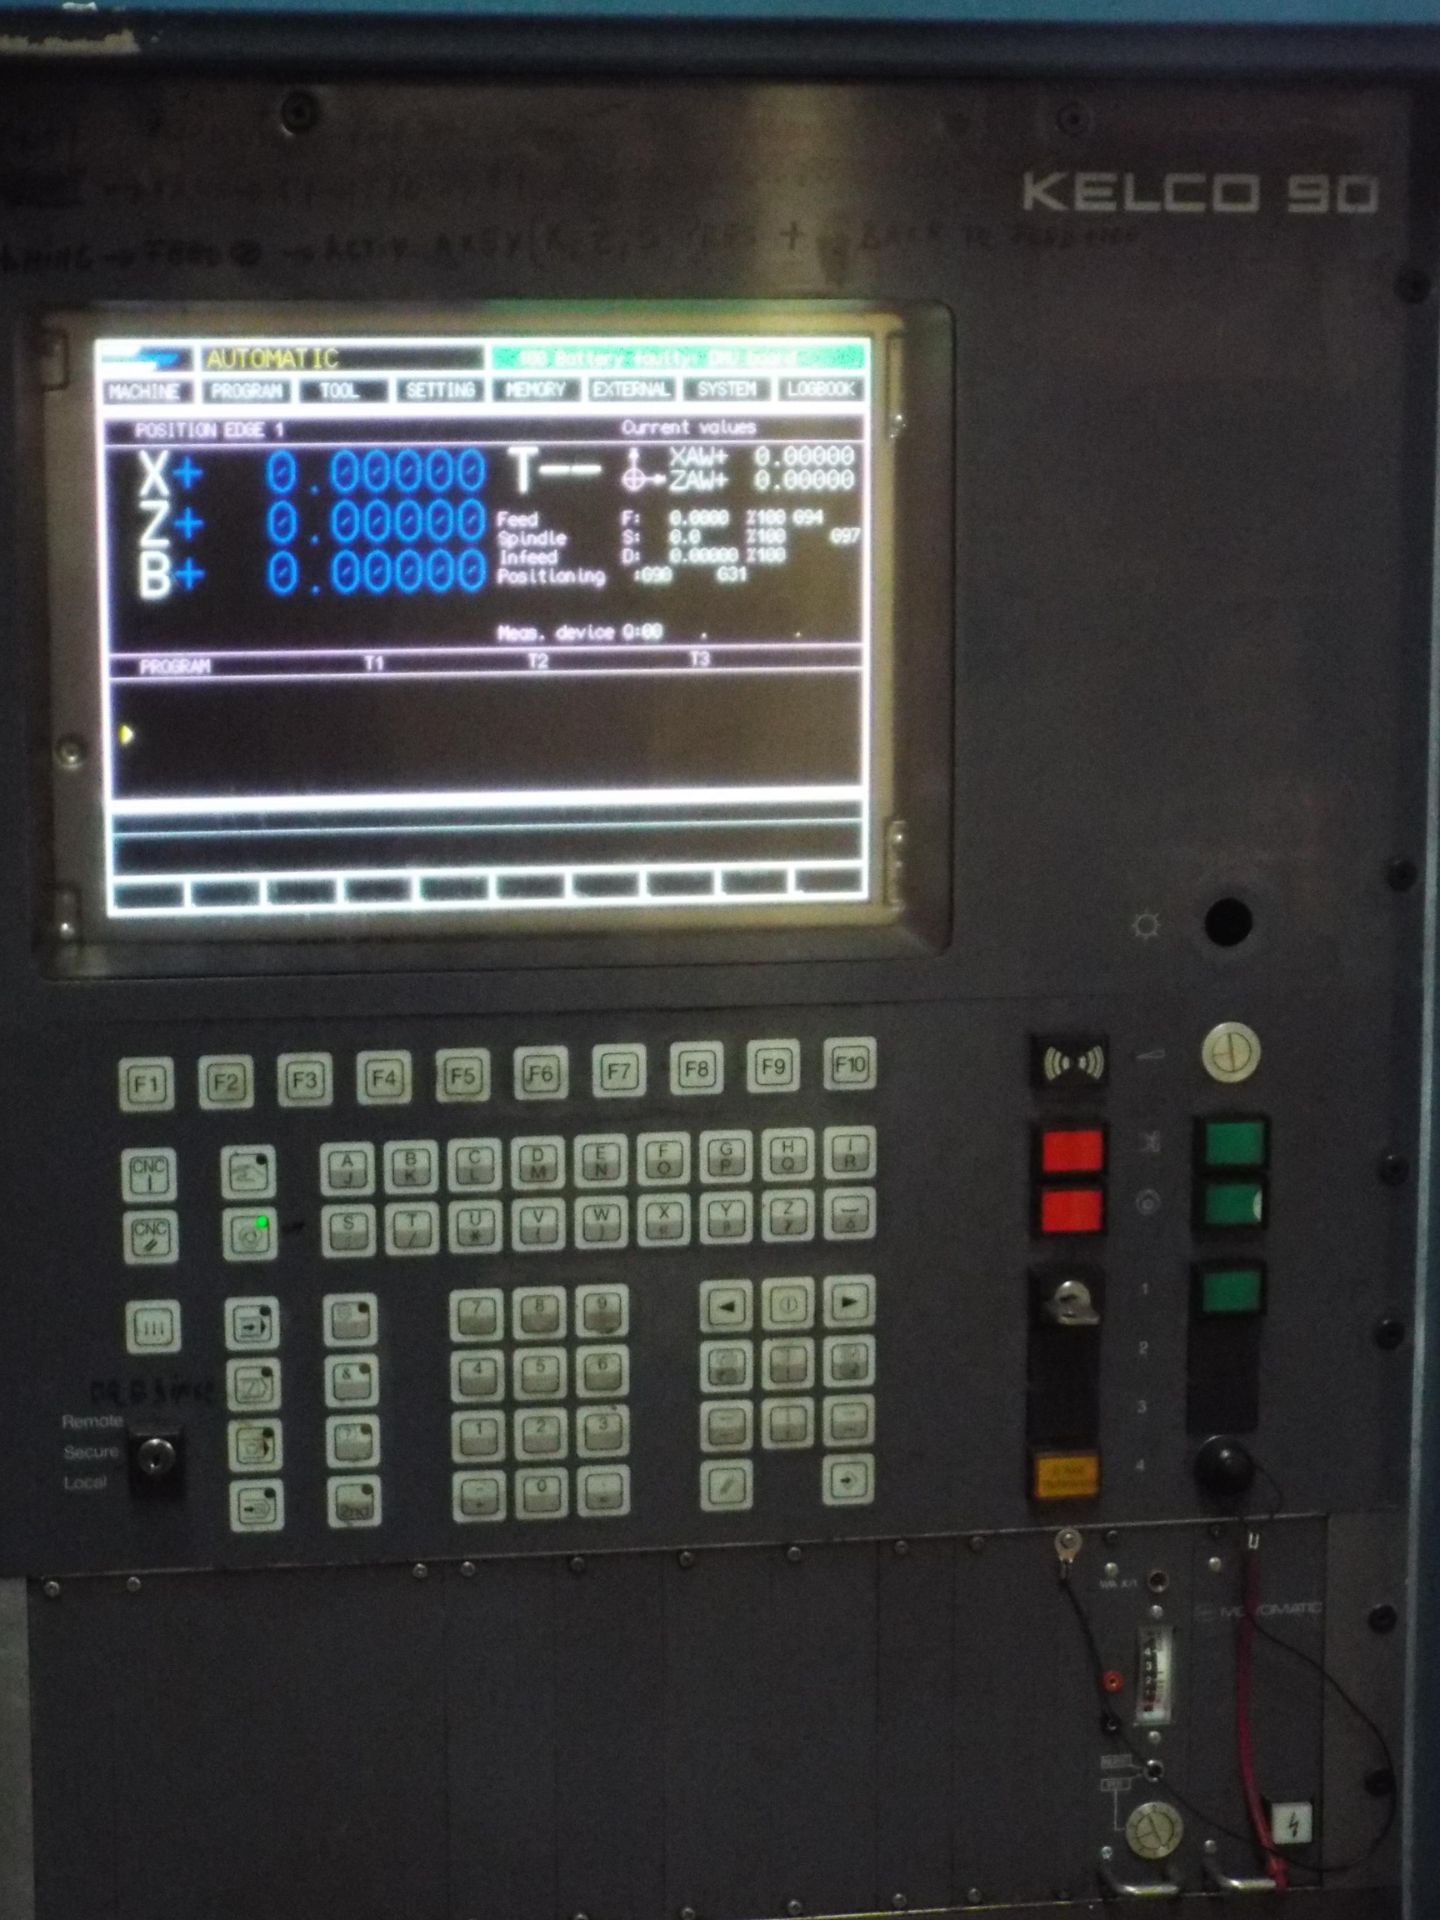 KELLENBERGER UR-M 175/1000 CNC CYLINDRICAL GRINDER WITH KELCO 90 CNC CONTROL, 40" BETWEEN CENTERS, - Image 7 of 14